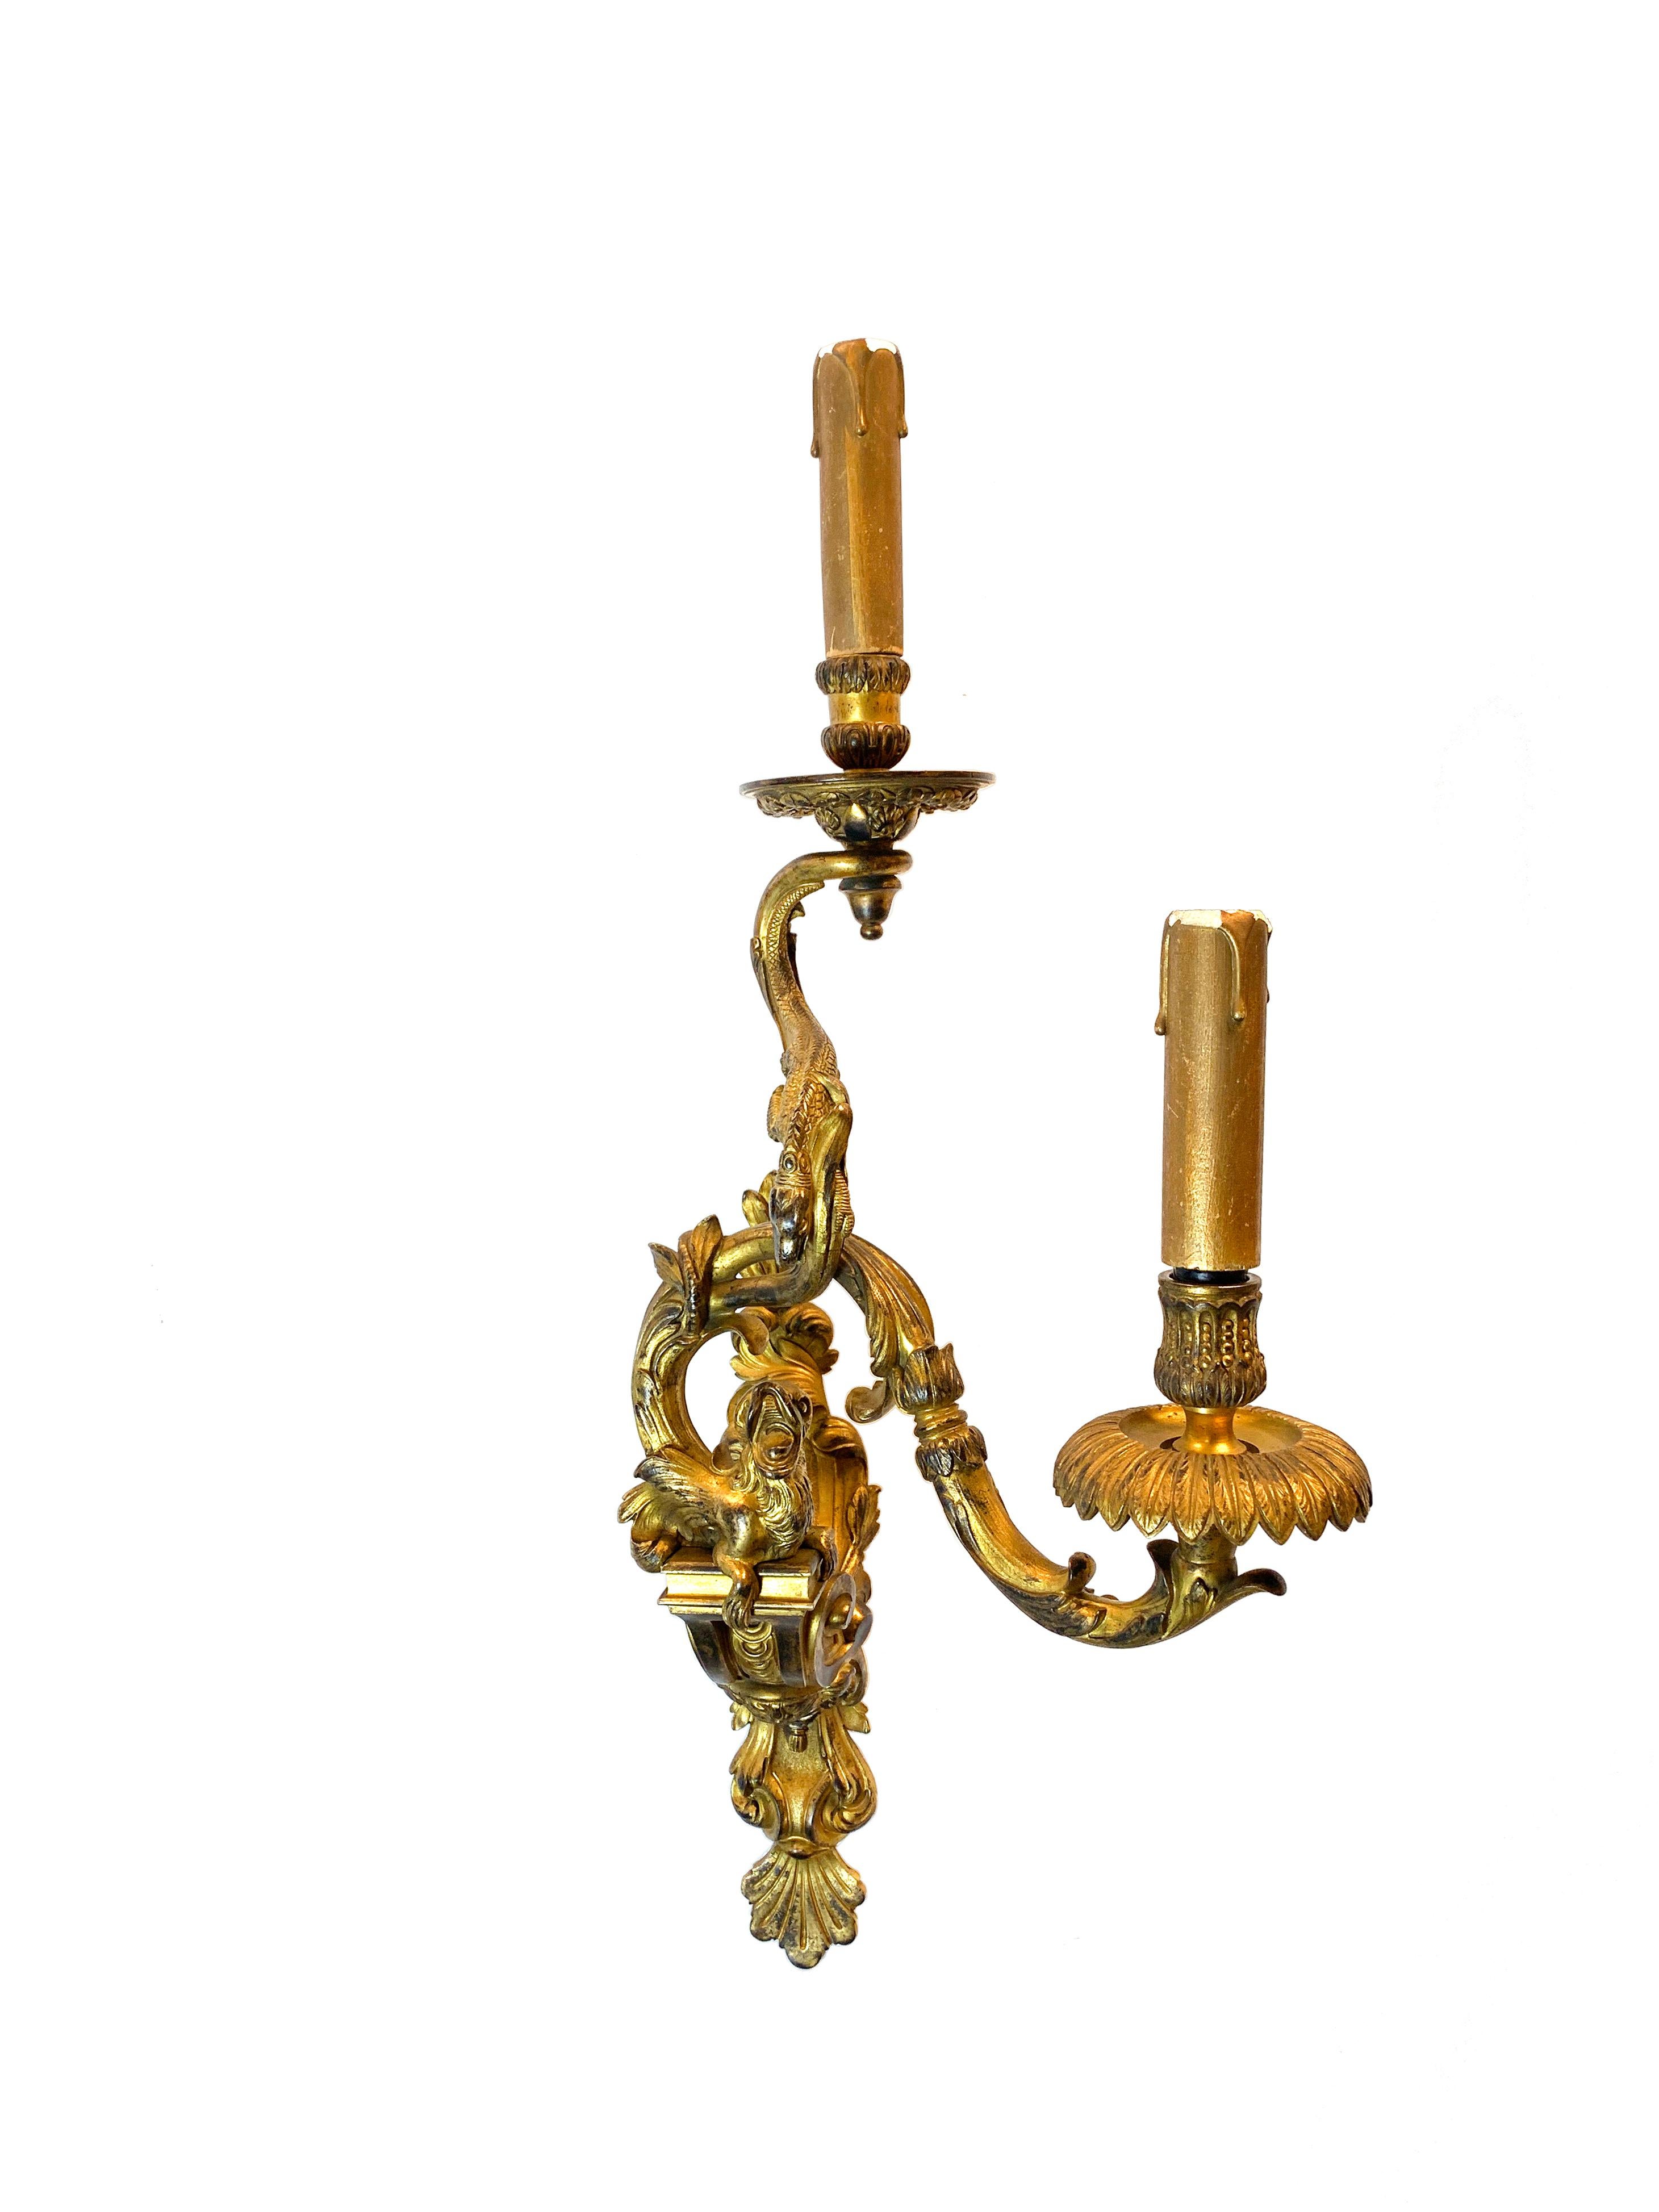 Bronze Pair of 19th Century Louis XV Style Ormolu Sconces After André-Charles Boulle For Sale